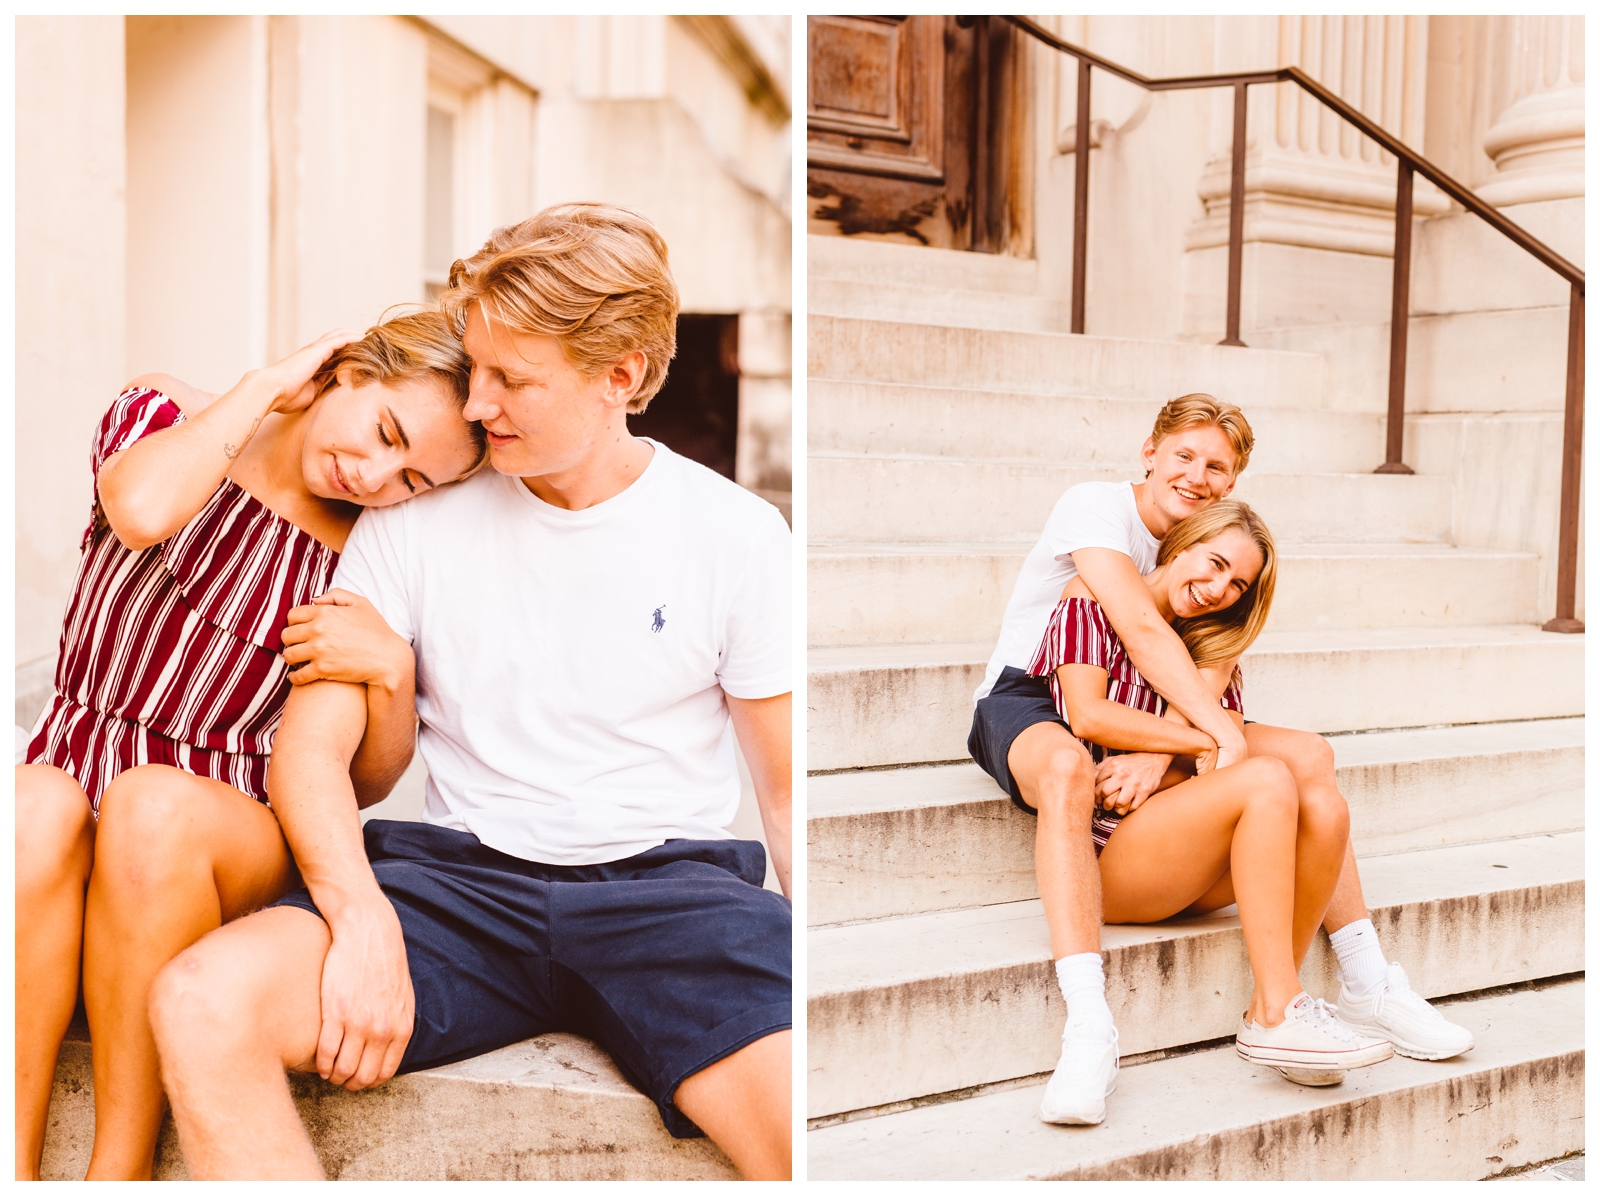 Mount Vernon, Baltimore Engagement Session - Brooke Michelle Photography